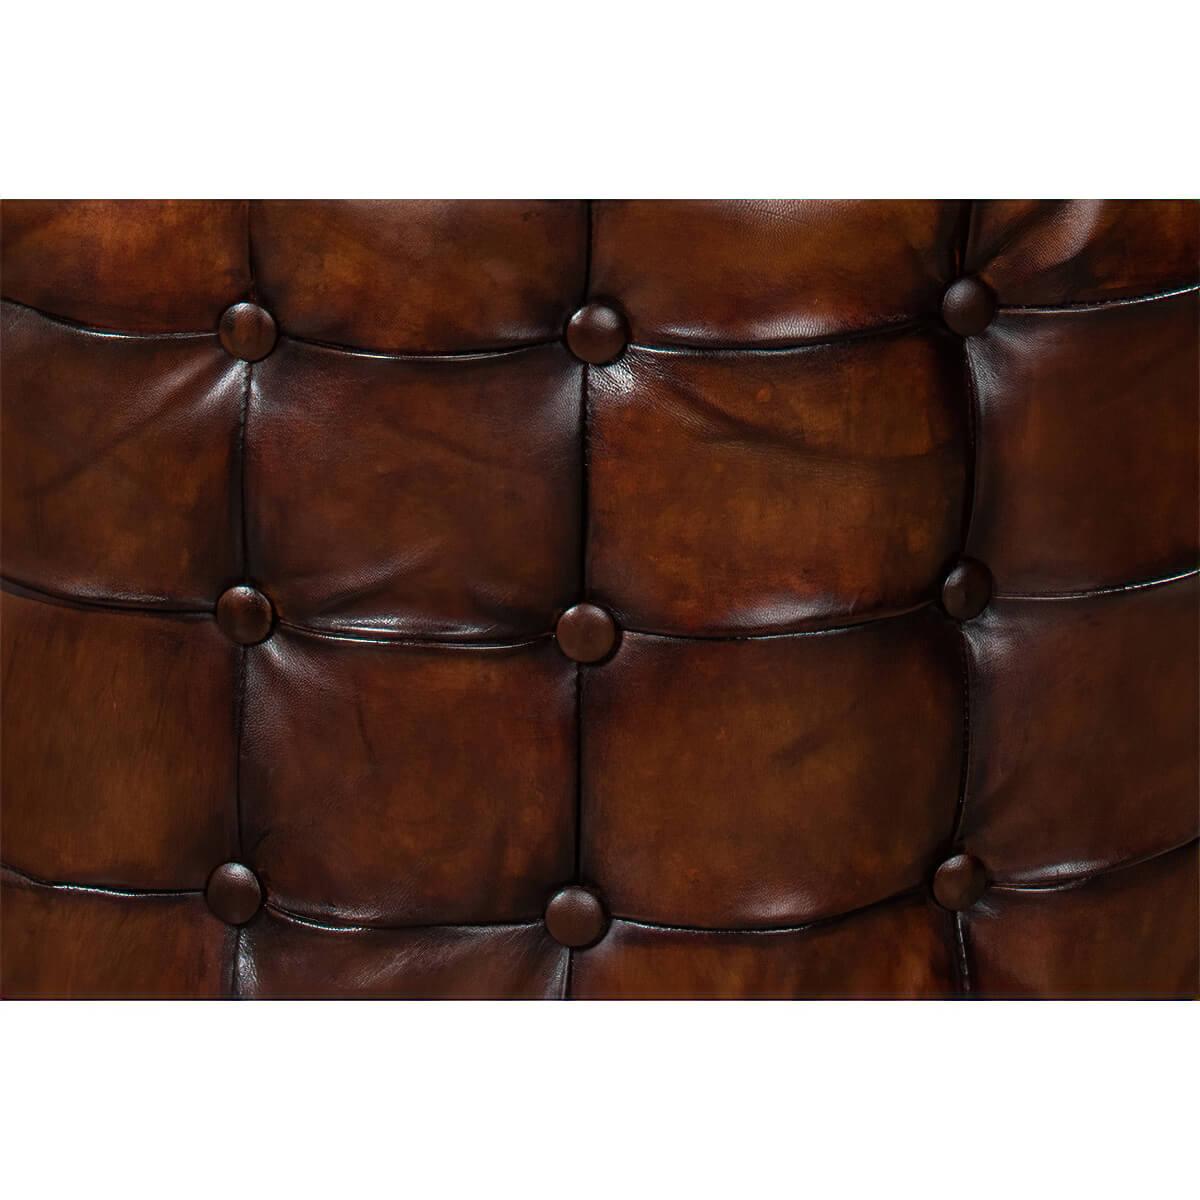 round tufted leather ottoman